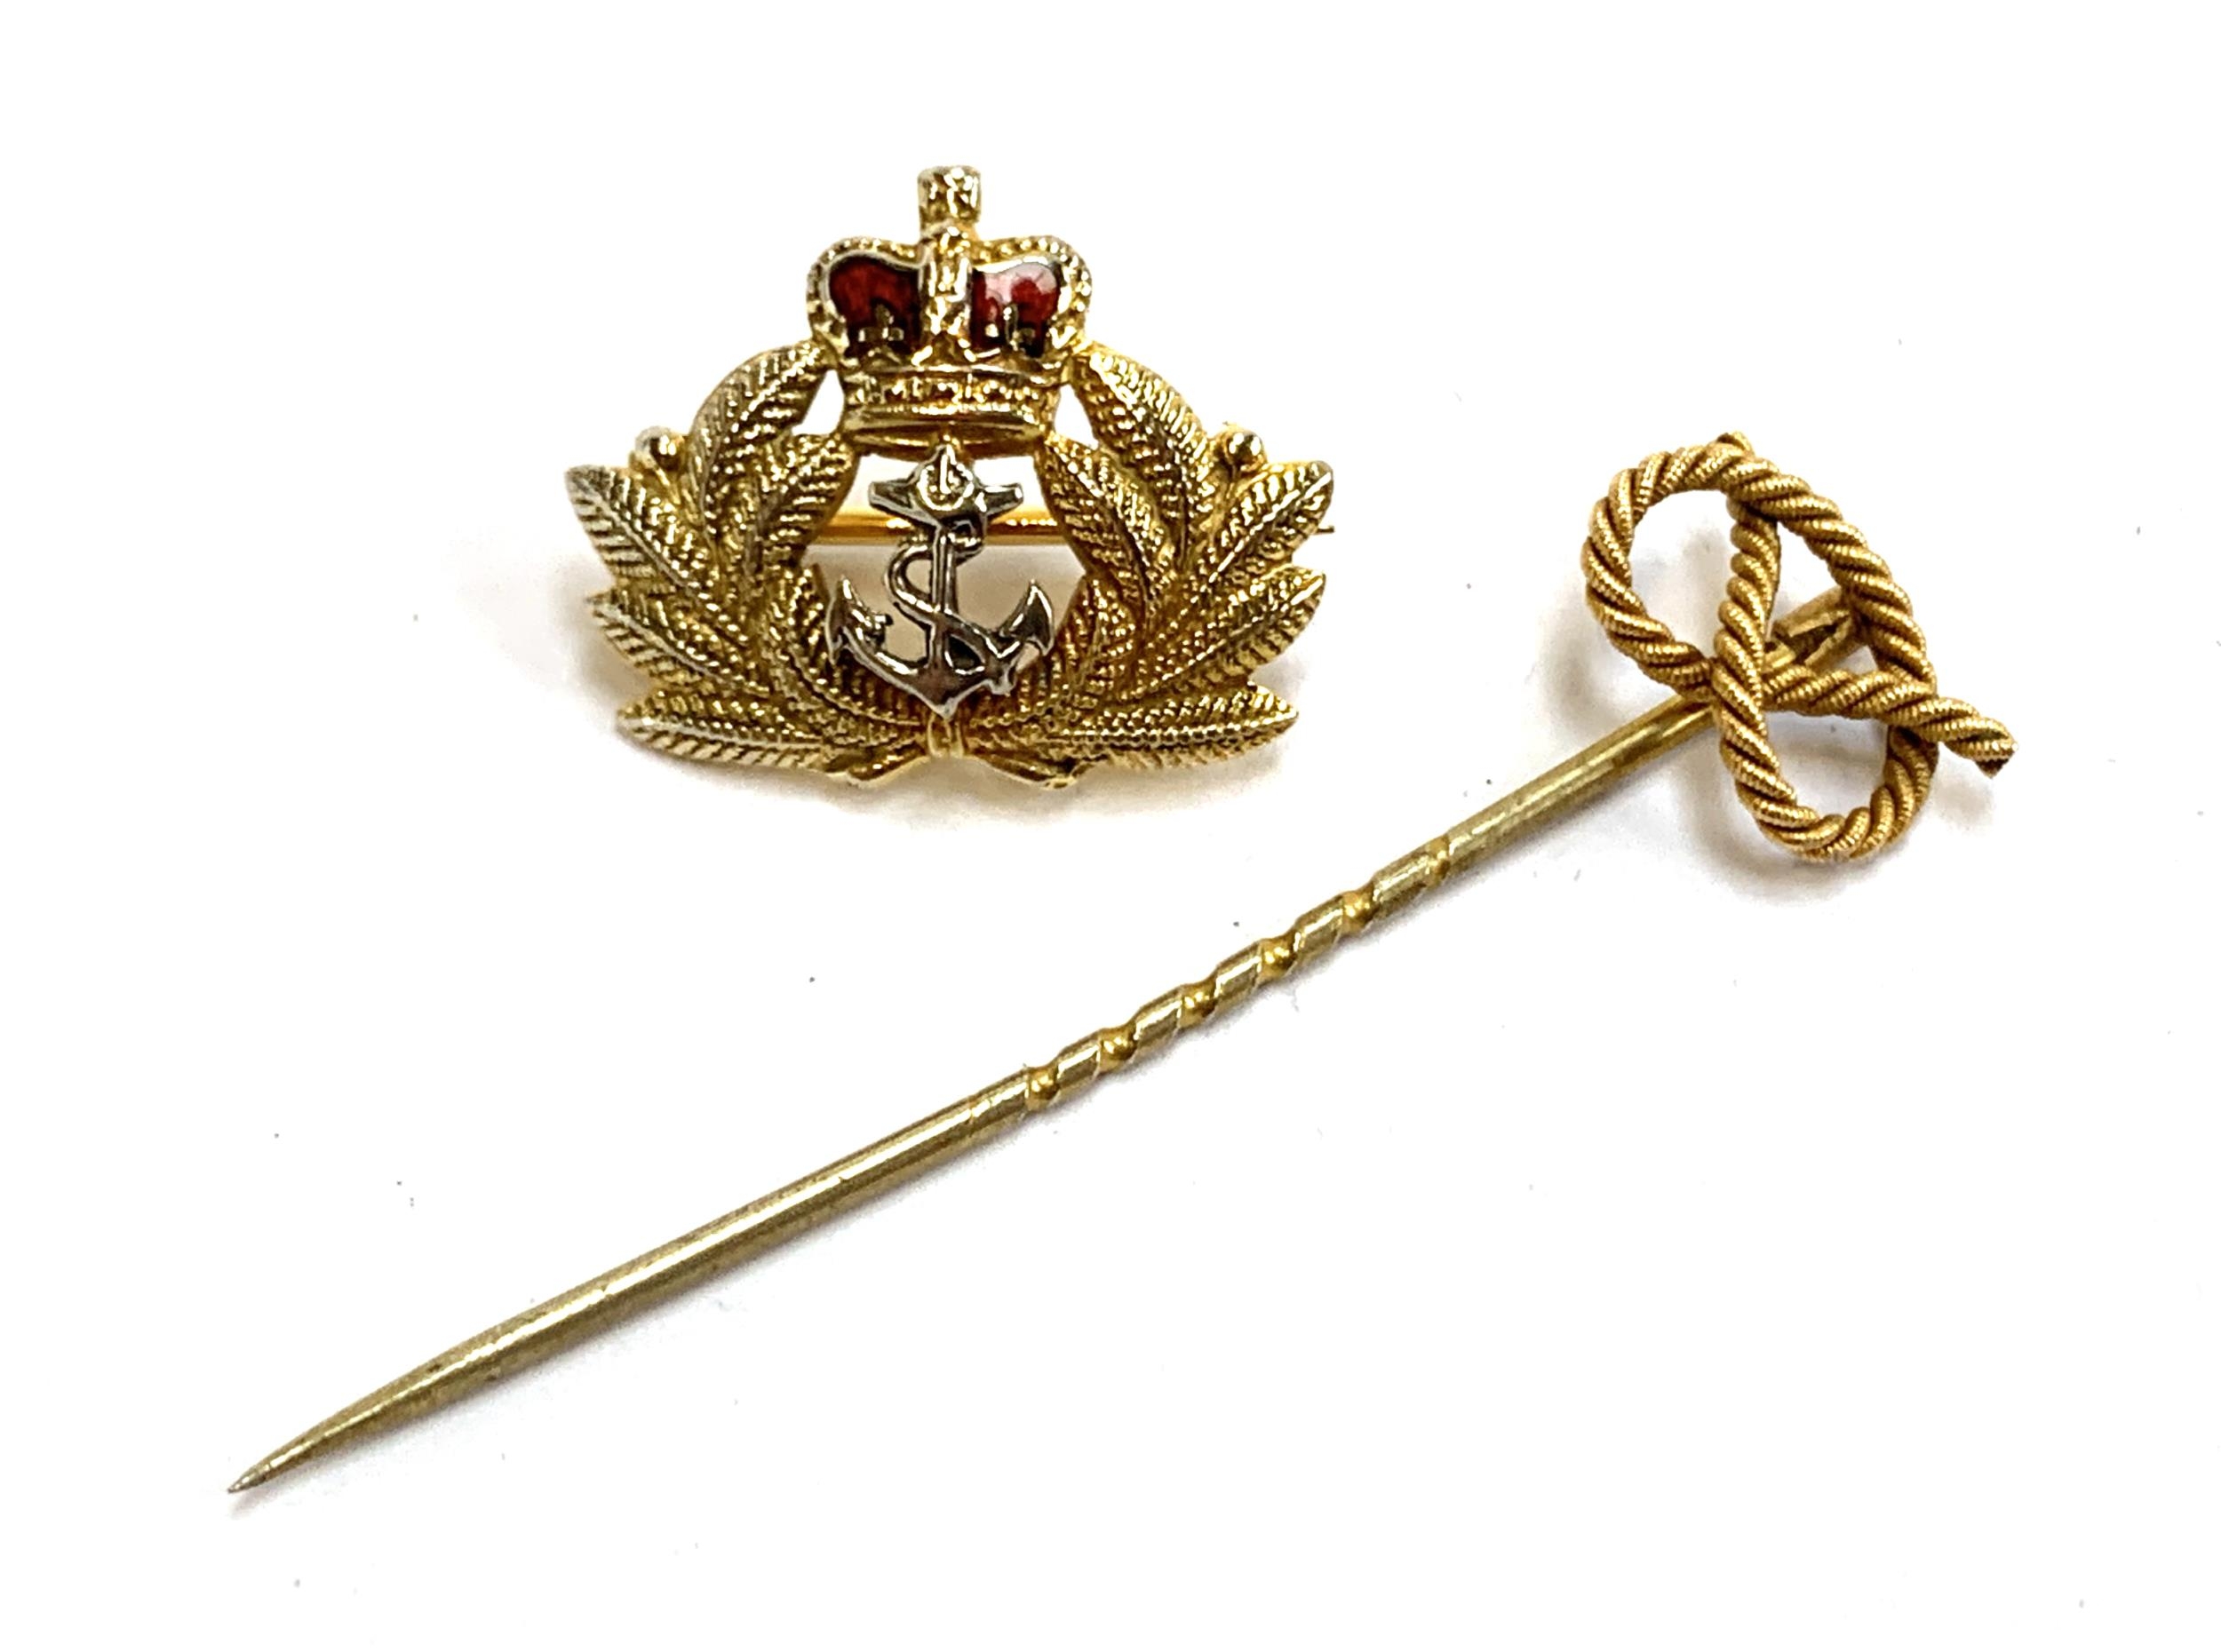 A 9ct gold and enamel regimental Royal Navy sweetheart brooch, 2.2cmW, 3g; together with a 9ct